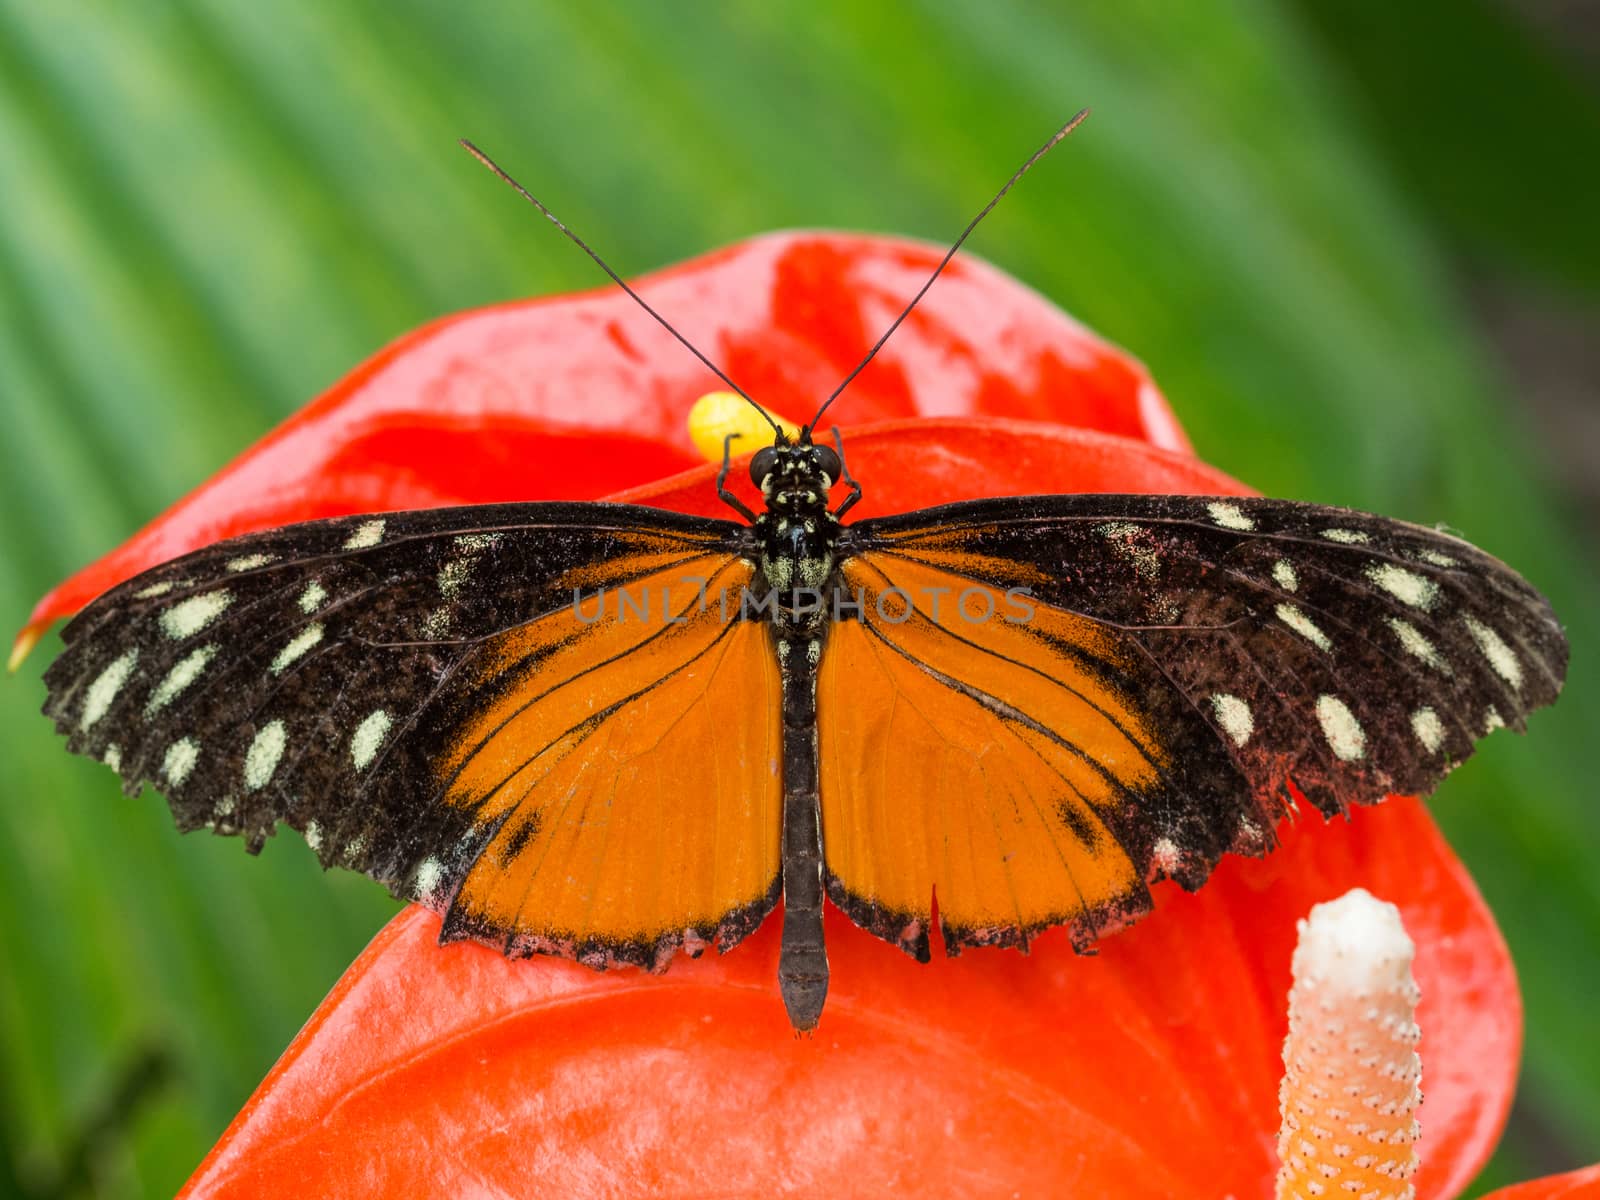 Black and orange spotted butterfly resting on red orchid